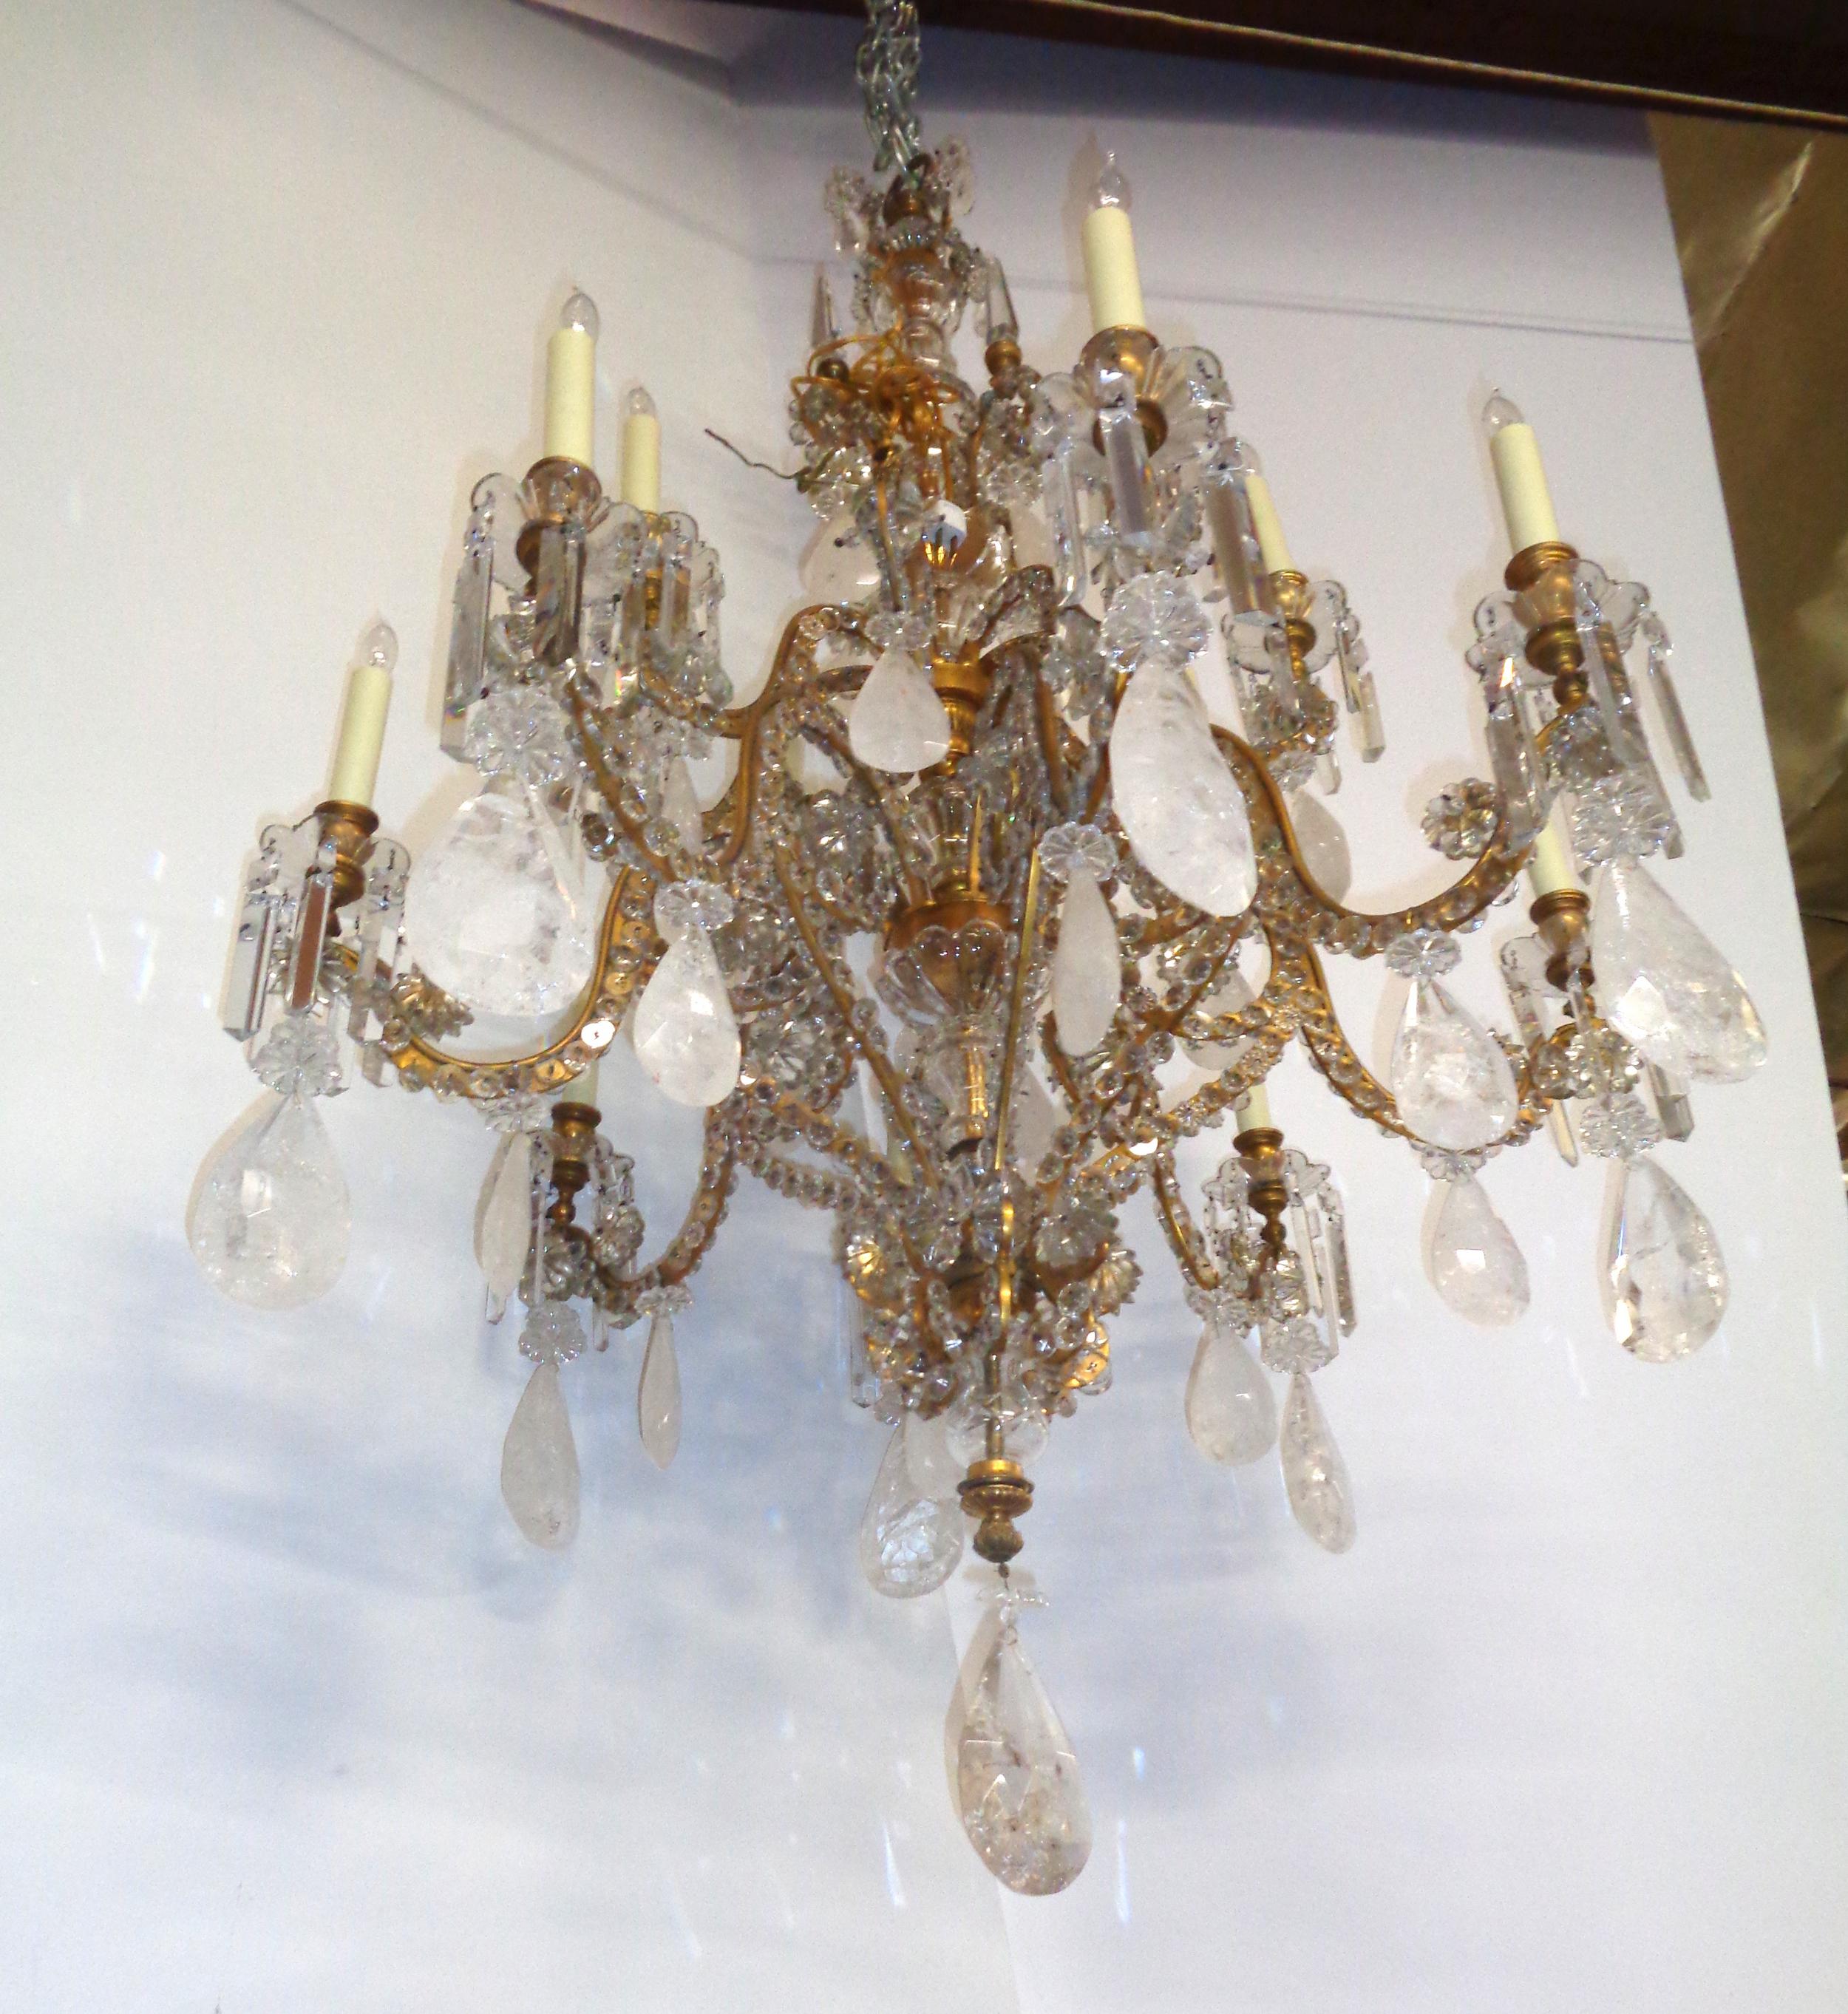 Magnificent original French Bagues rock crystal, bronze framed chandelier. The frame has beautiful crystal rosettes on all of the arms and bobeche cups under the sixteen graduated candlelights. The chandelier is newly electrified.